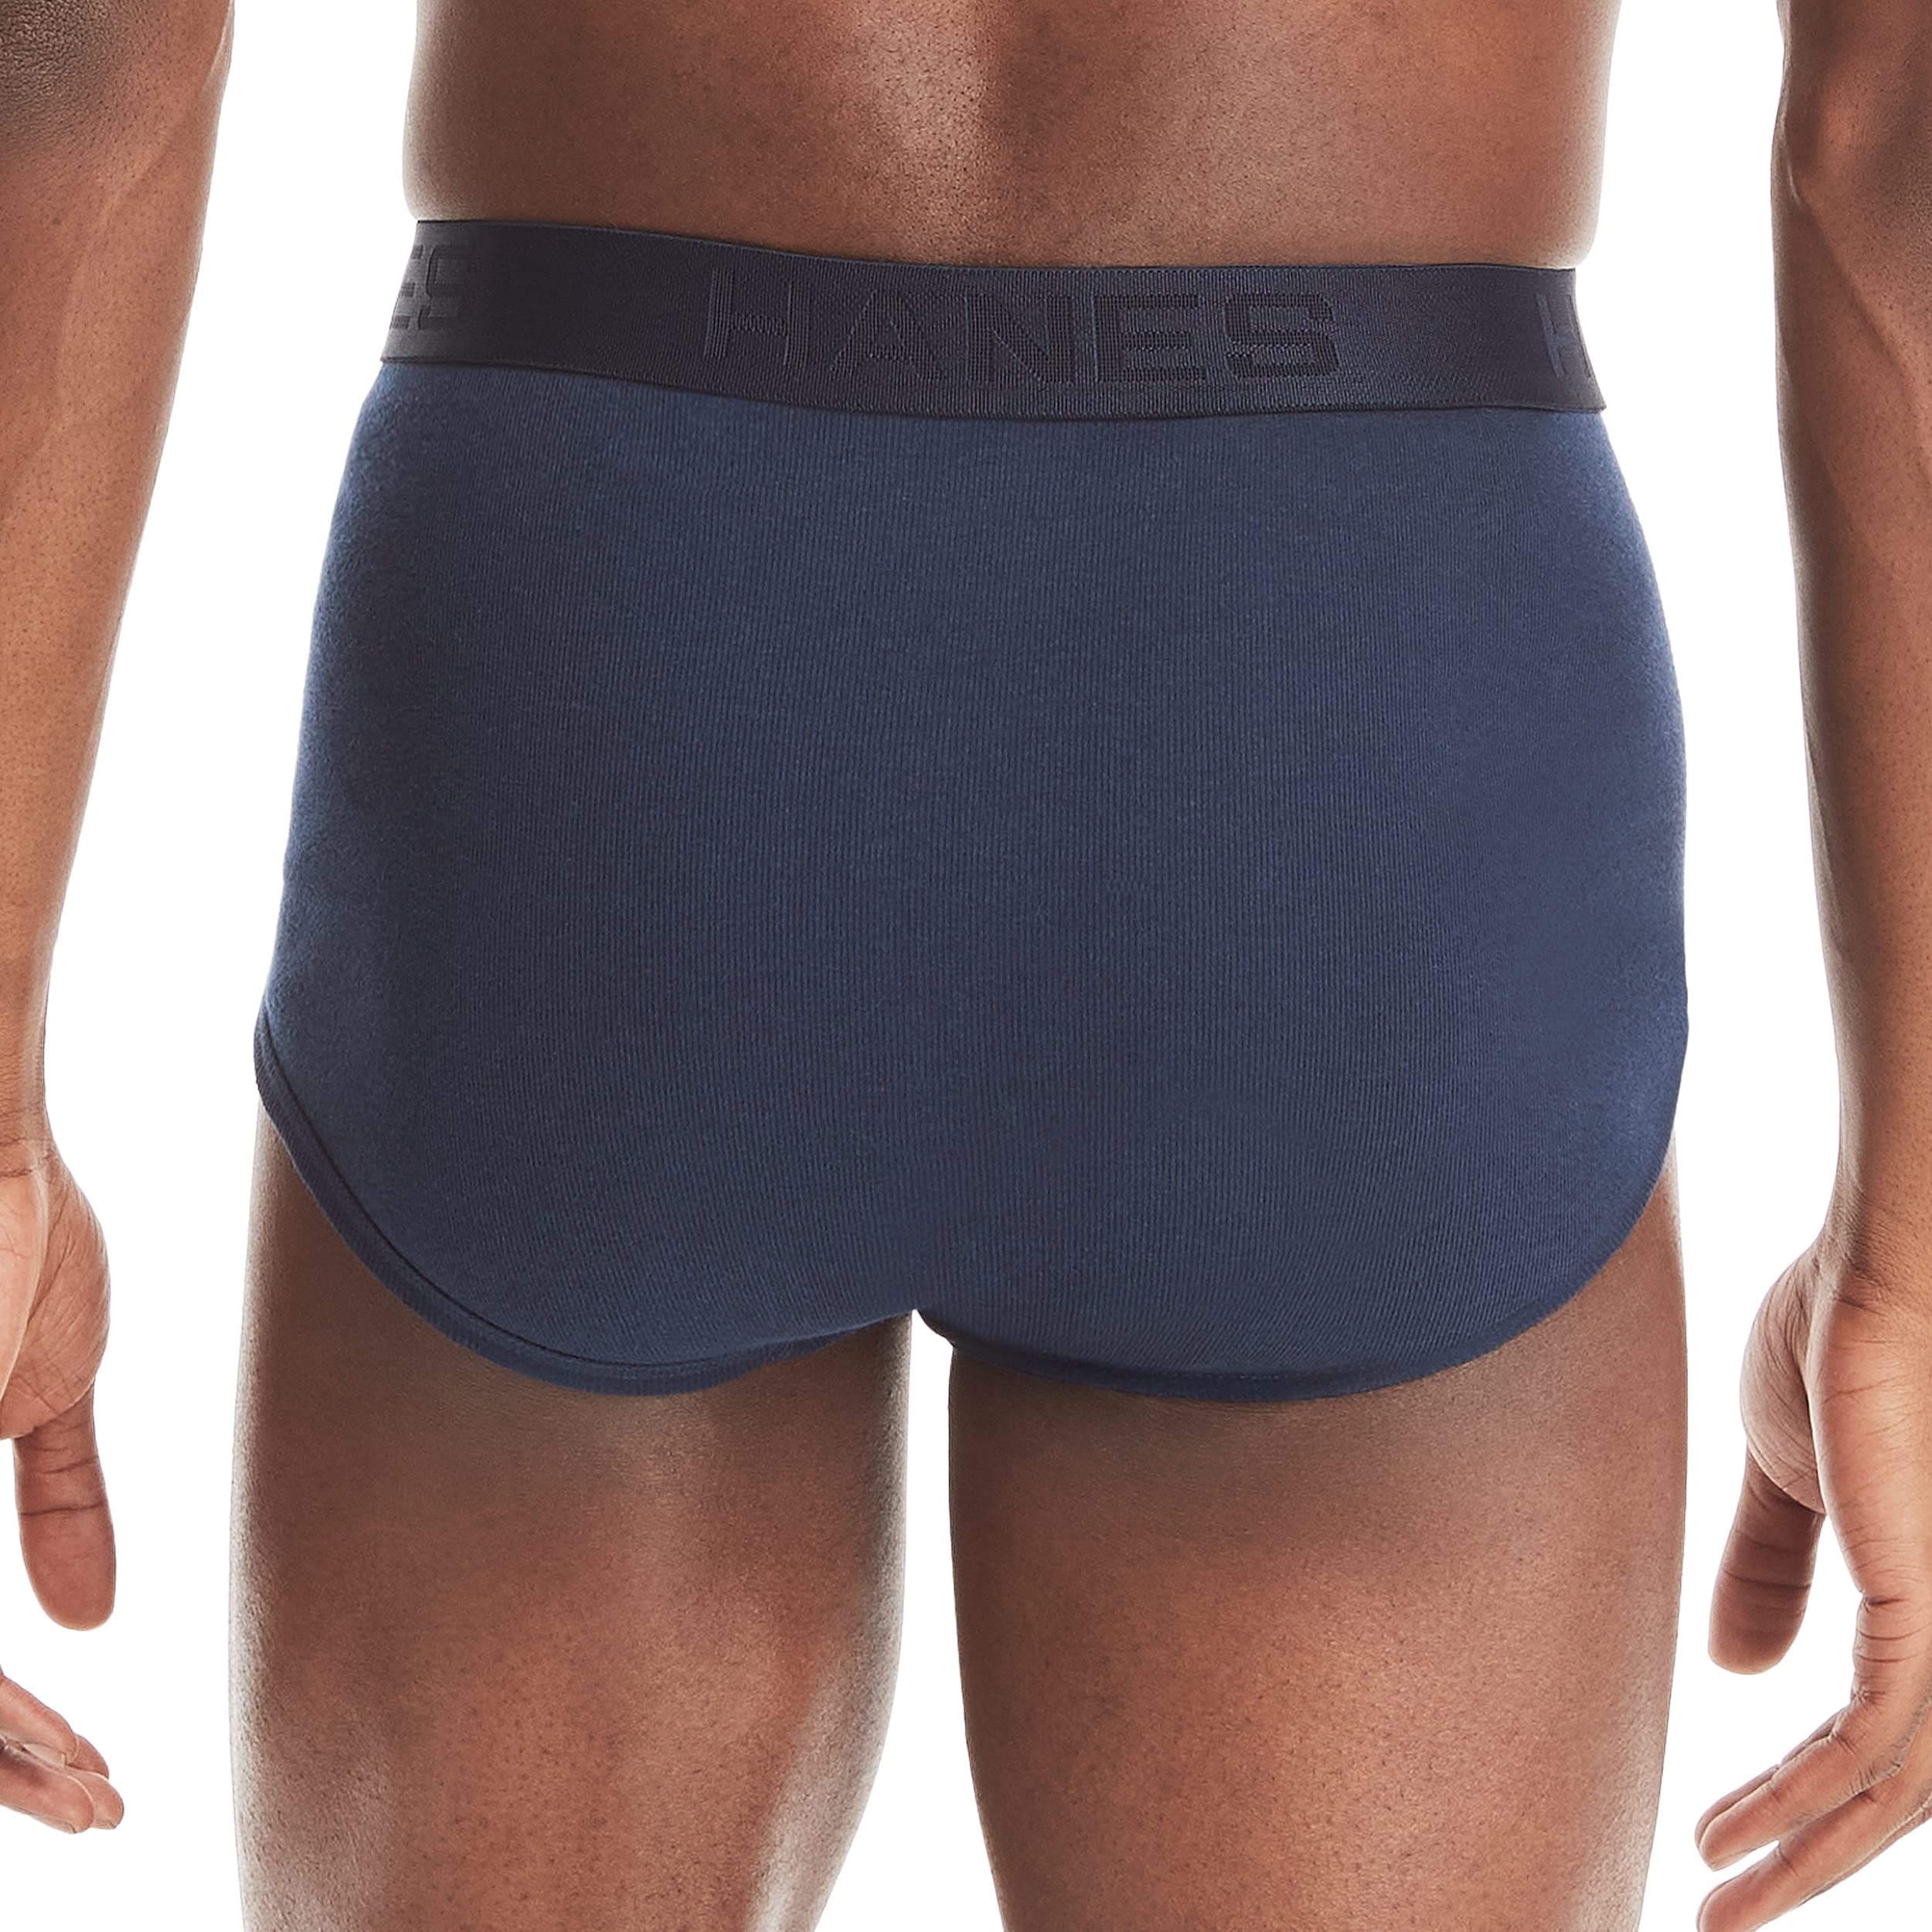 Hanes Ultimate mens Ultimate Tagless With Comfortflex Waistband - Multiple Packs and Colors briefs underwear, 7 Pack Blue Assorted, X-Large US